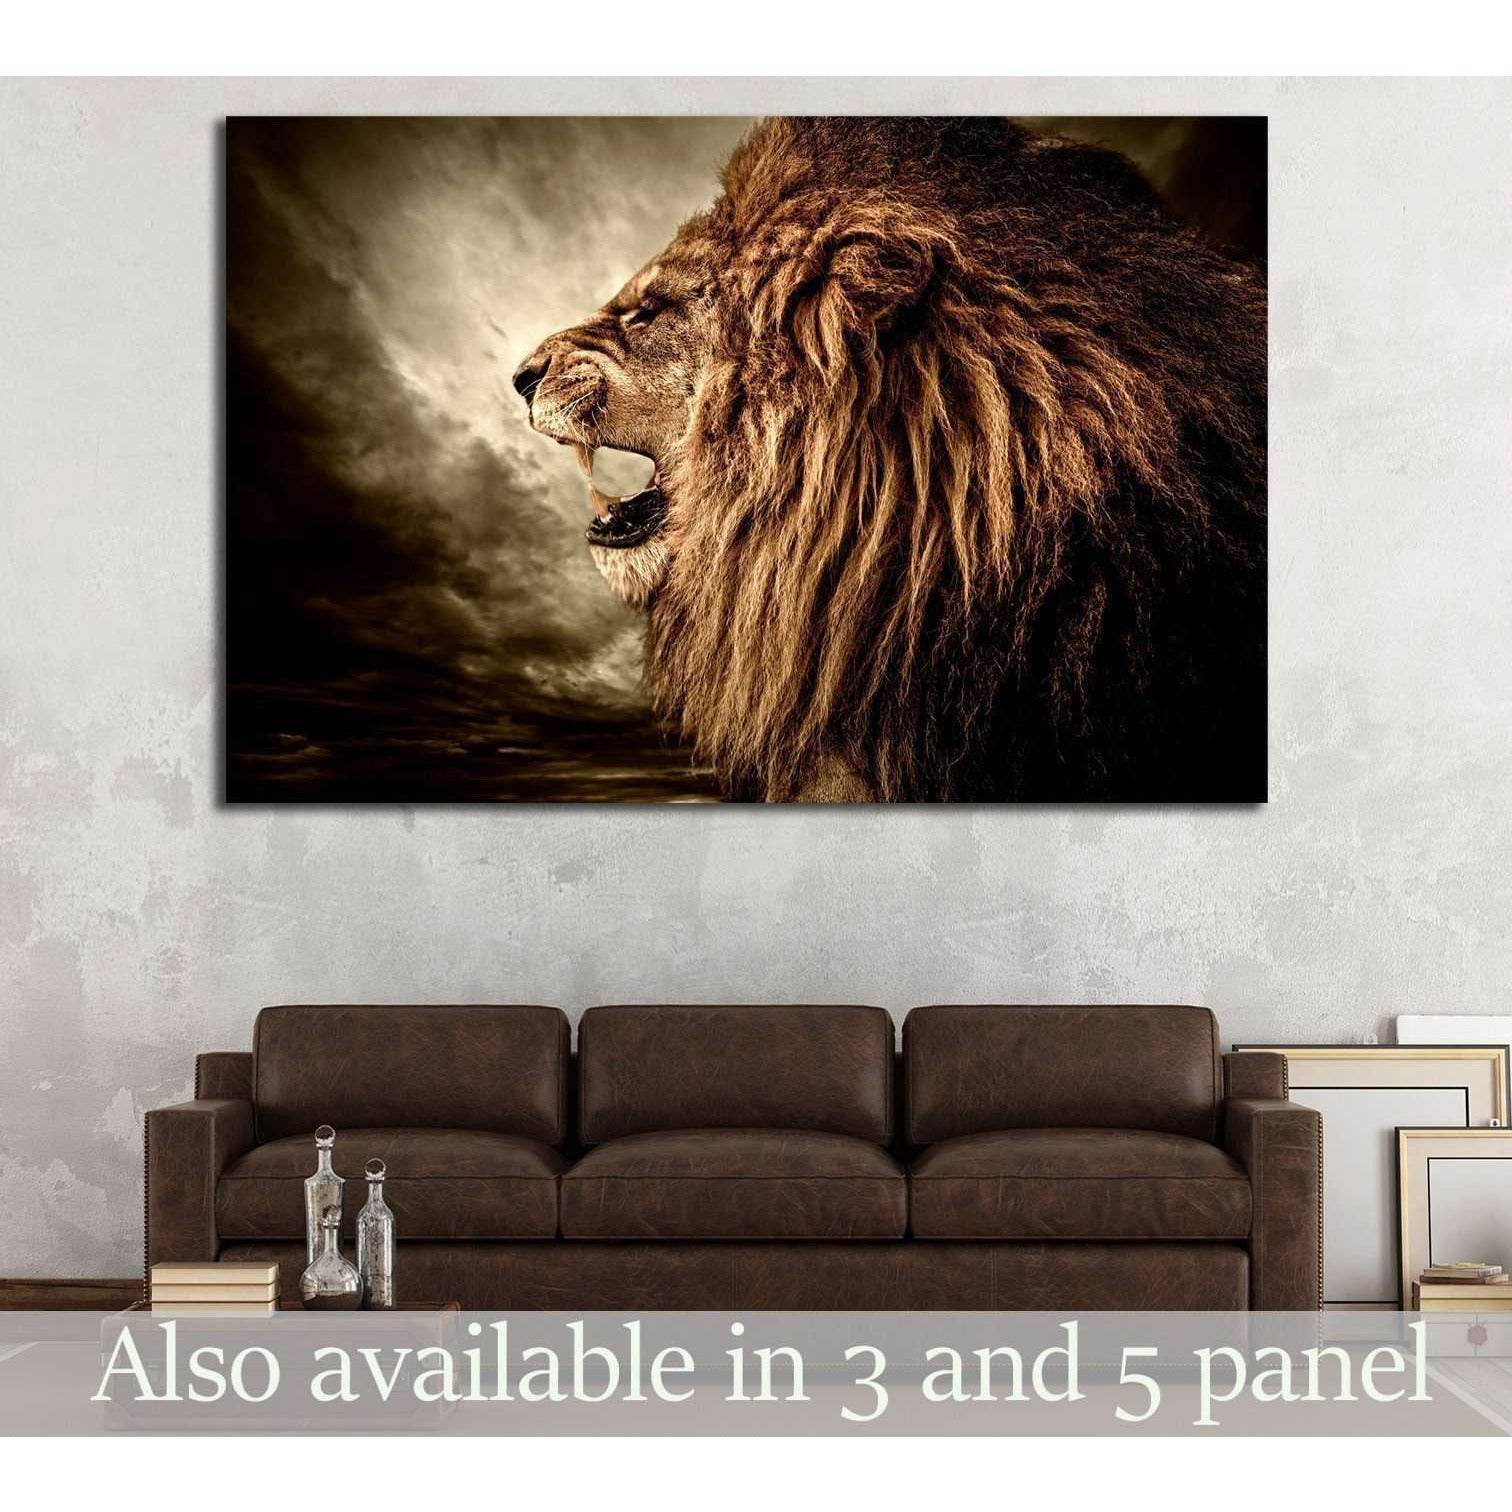 Roaring lion against stormy sky №1844 Ready to Hang Canvas Print